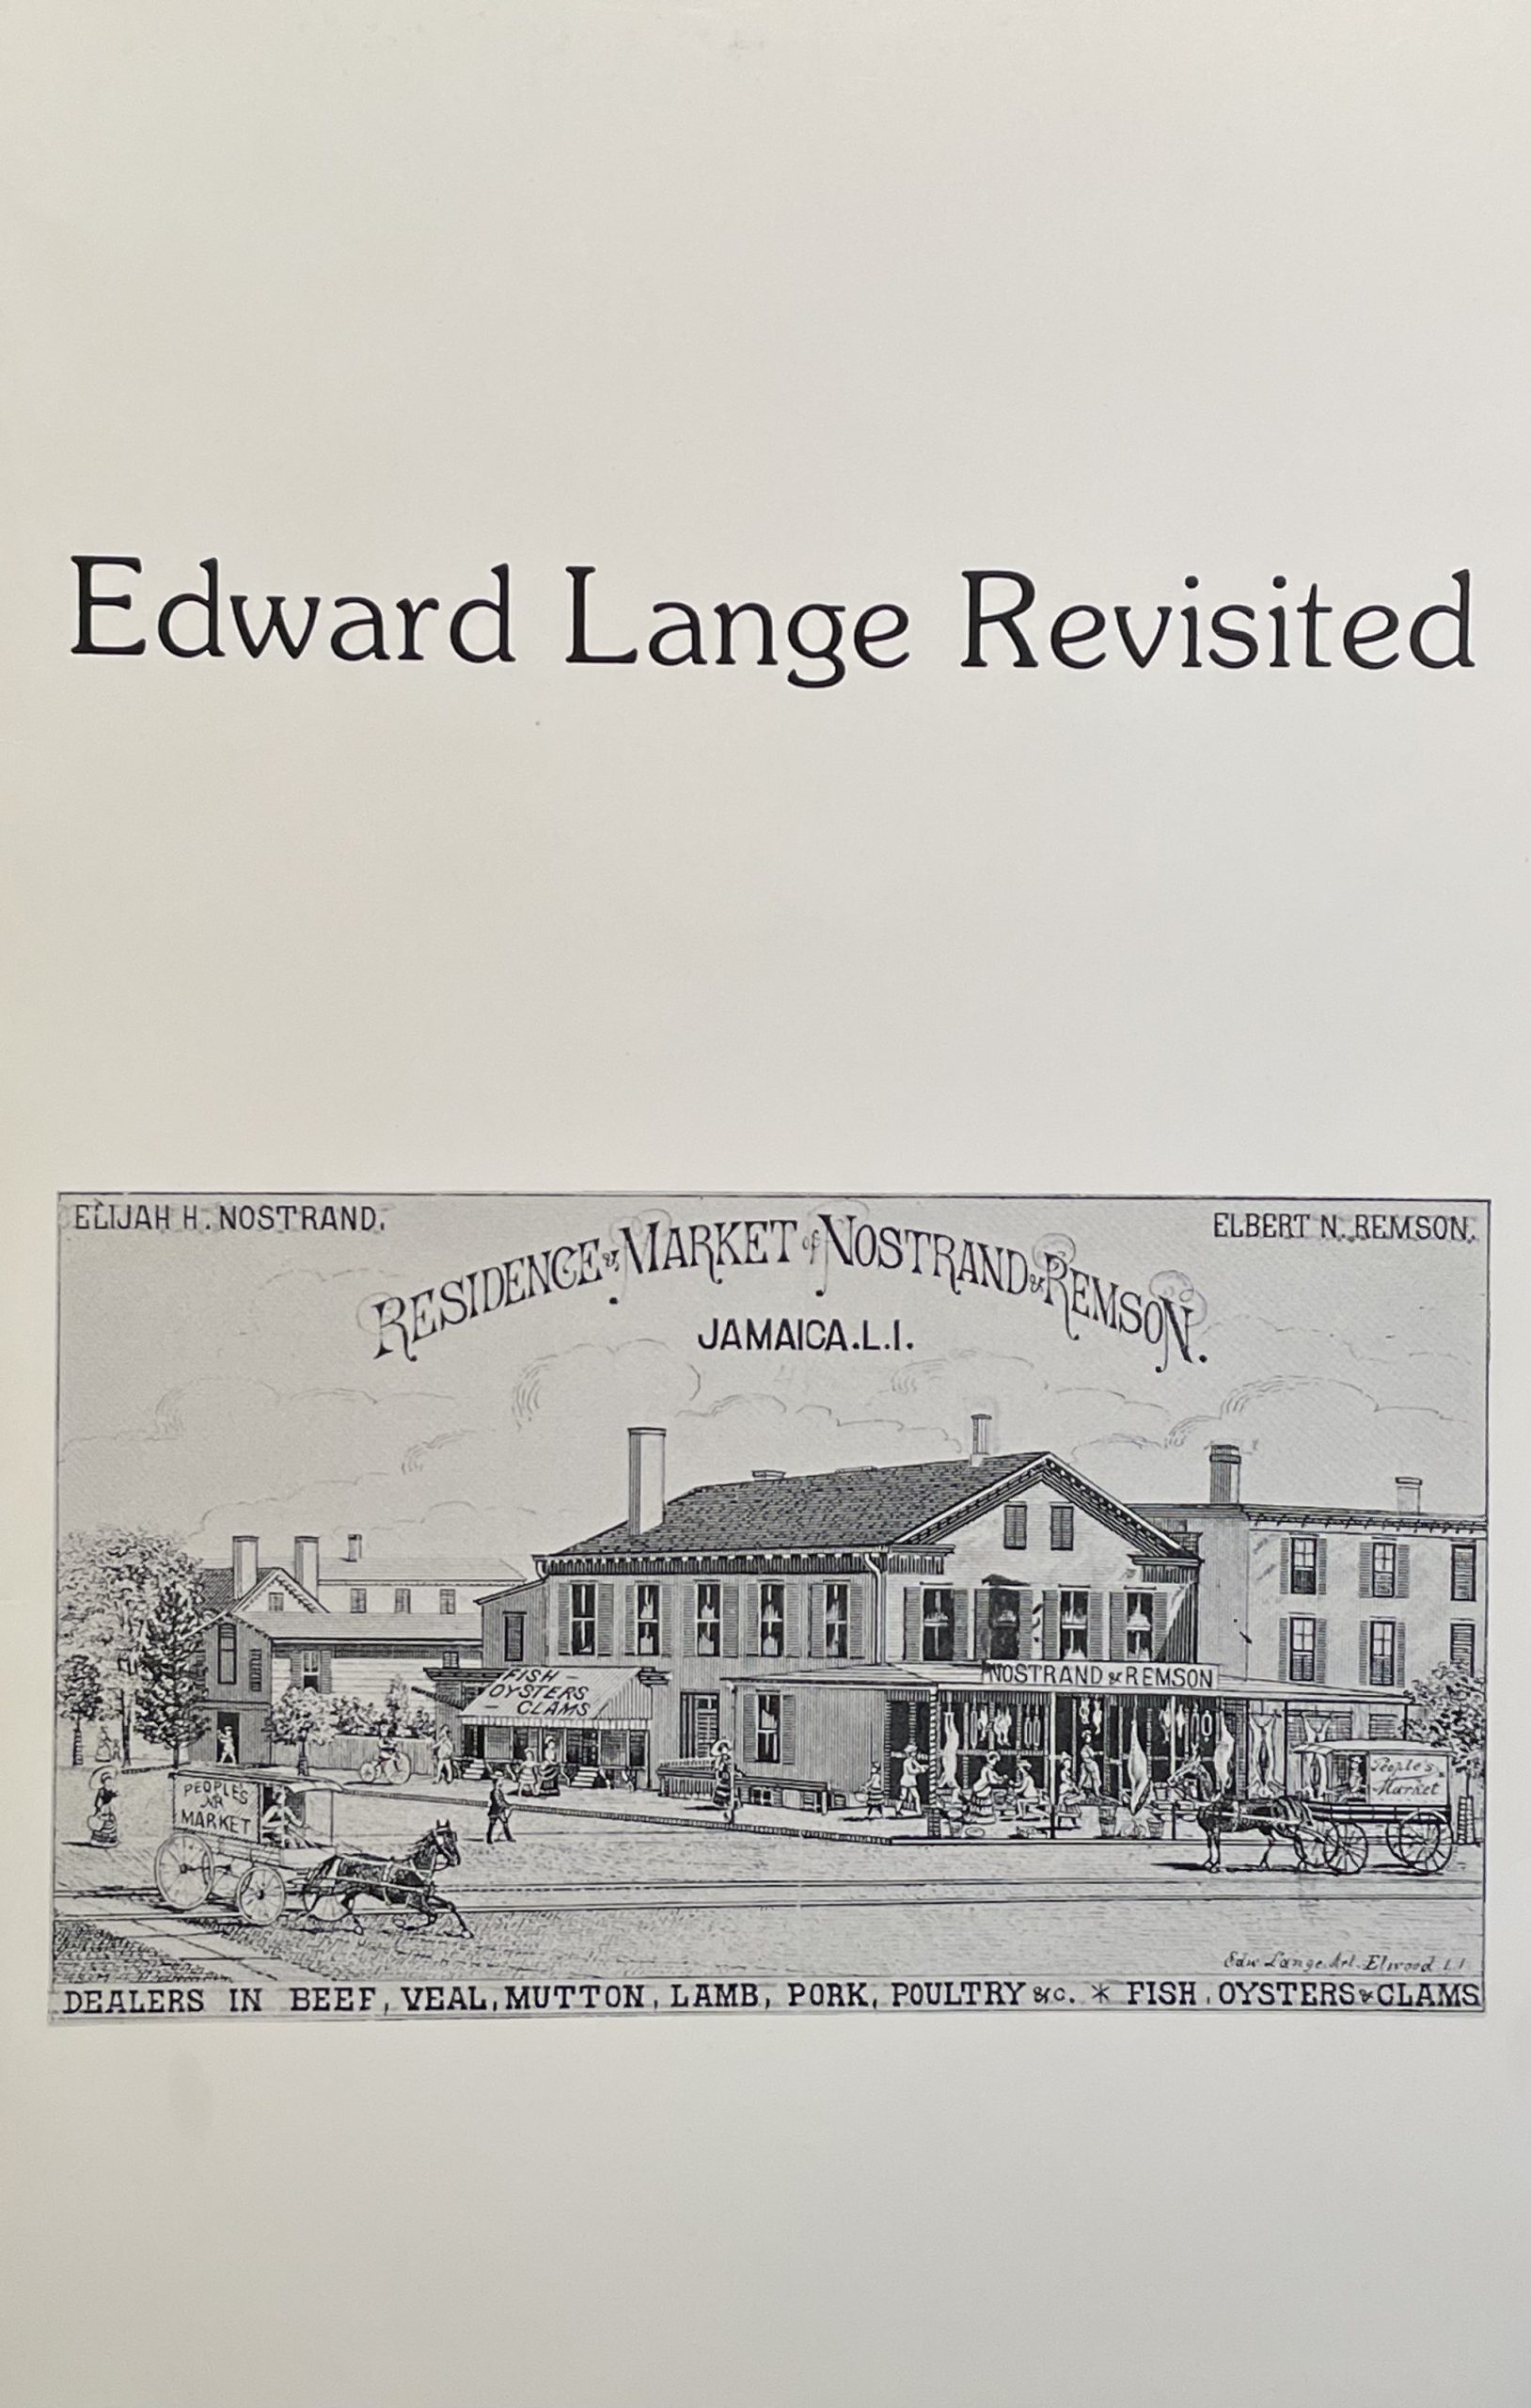 EdwardLangeRevisited-scaled.jpg Preservation Long Island has a longstanding tradition of studying the artwork of Edward Lange. In 1979, then-curator Dean F. Failey and researcher Zachary N. Studenroth published a seminal text on the artist's work titled <a href=